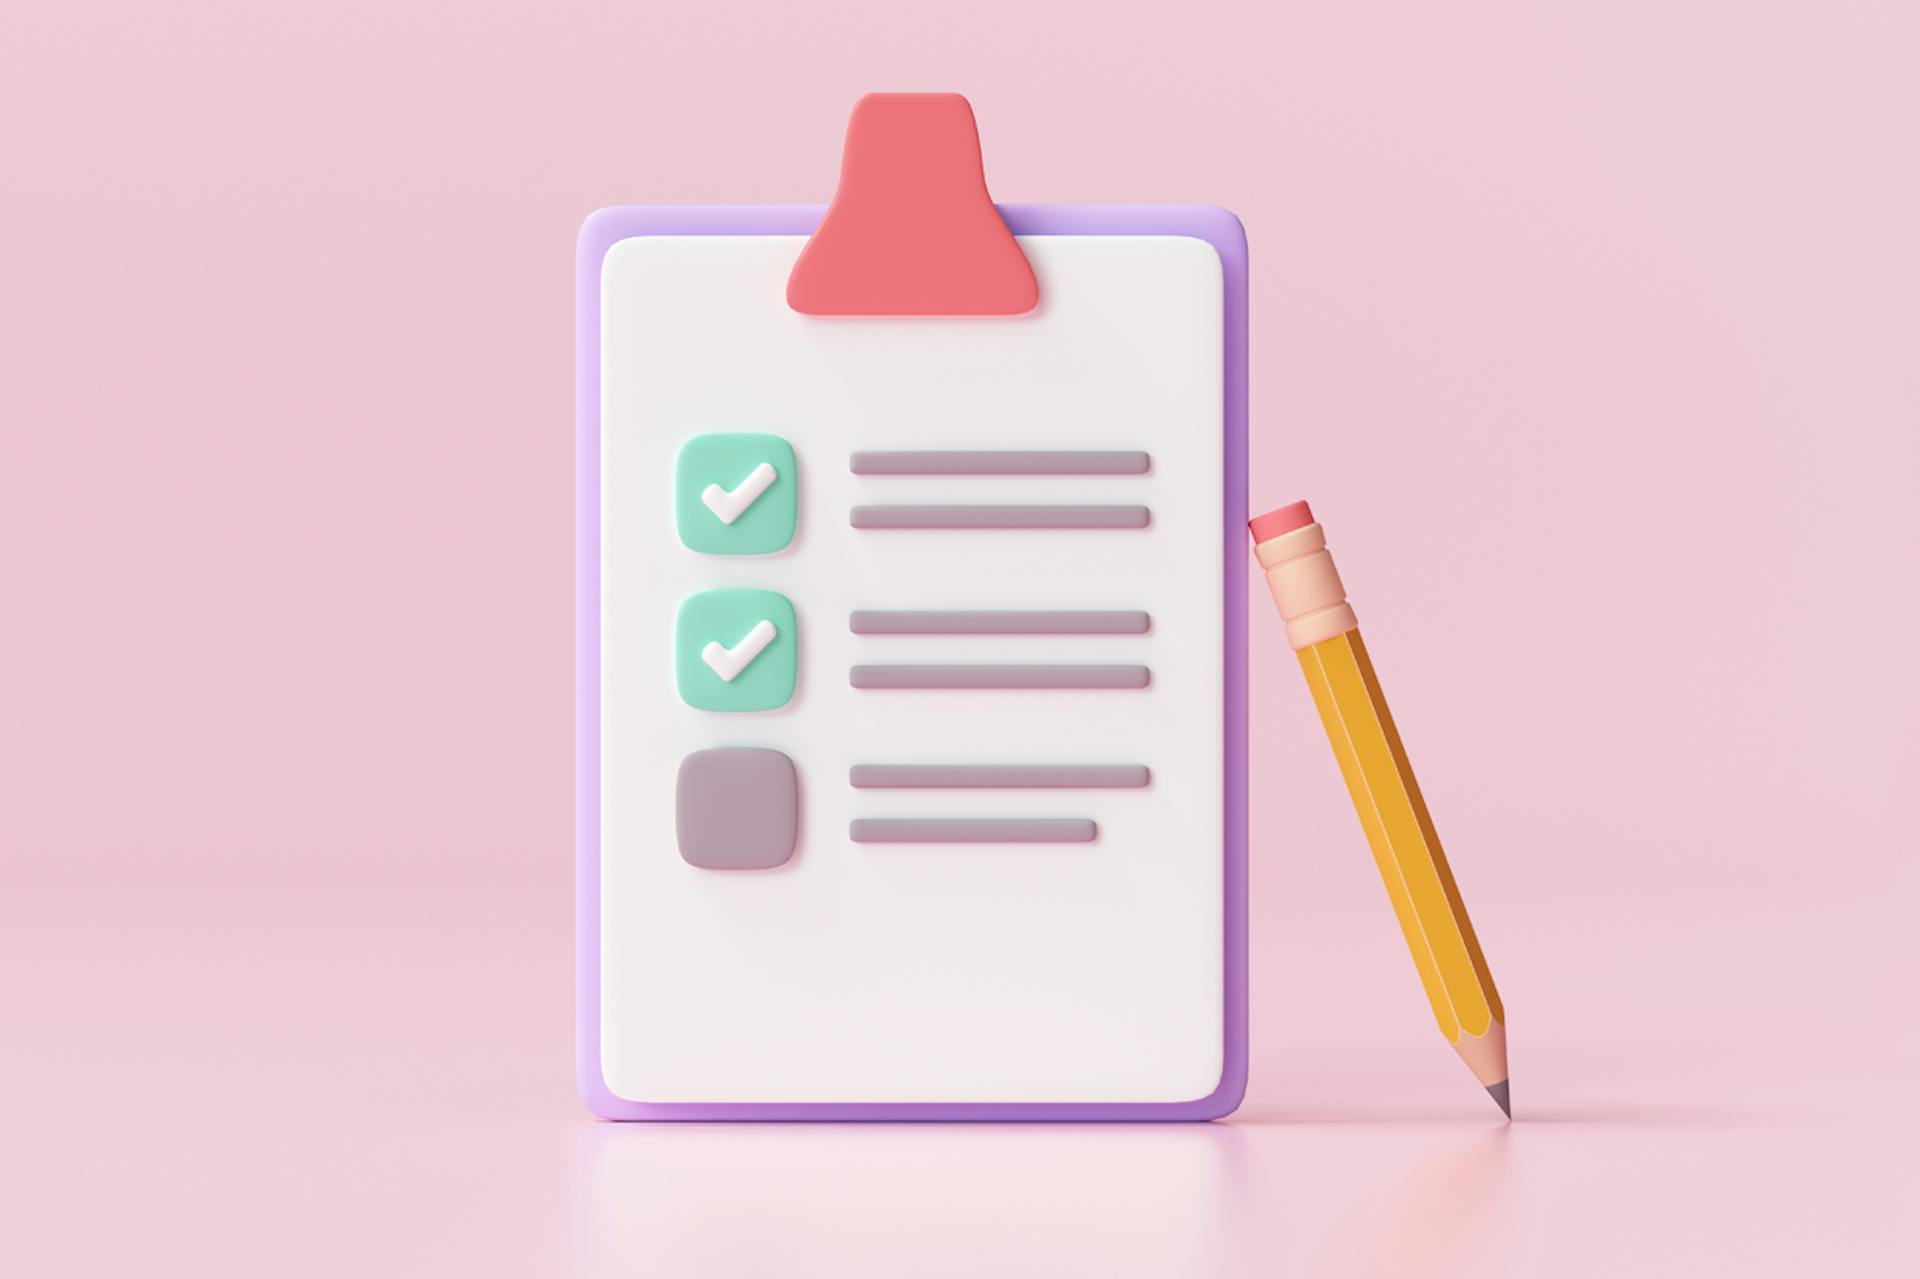 Cartoon image of clipboard with checklist and pencil against a pink background. Main image for blog post on creating a media database for maximum PR ROI